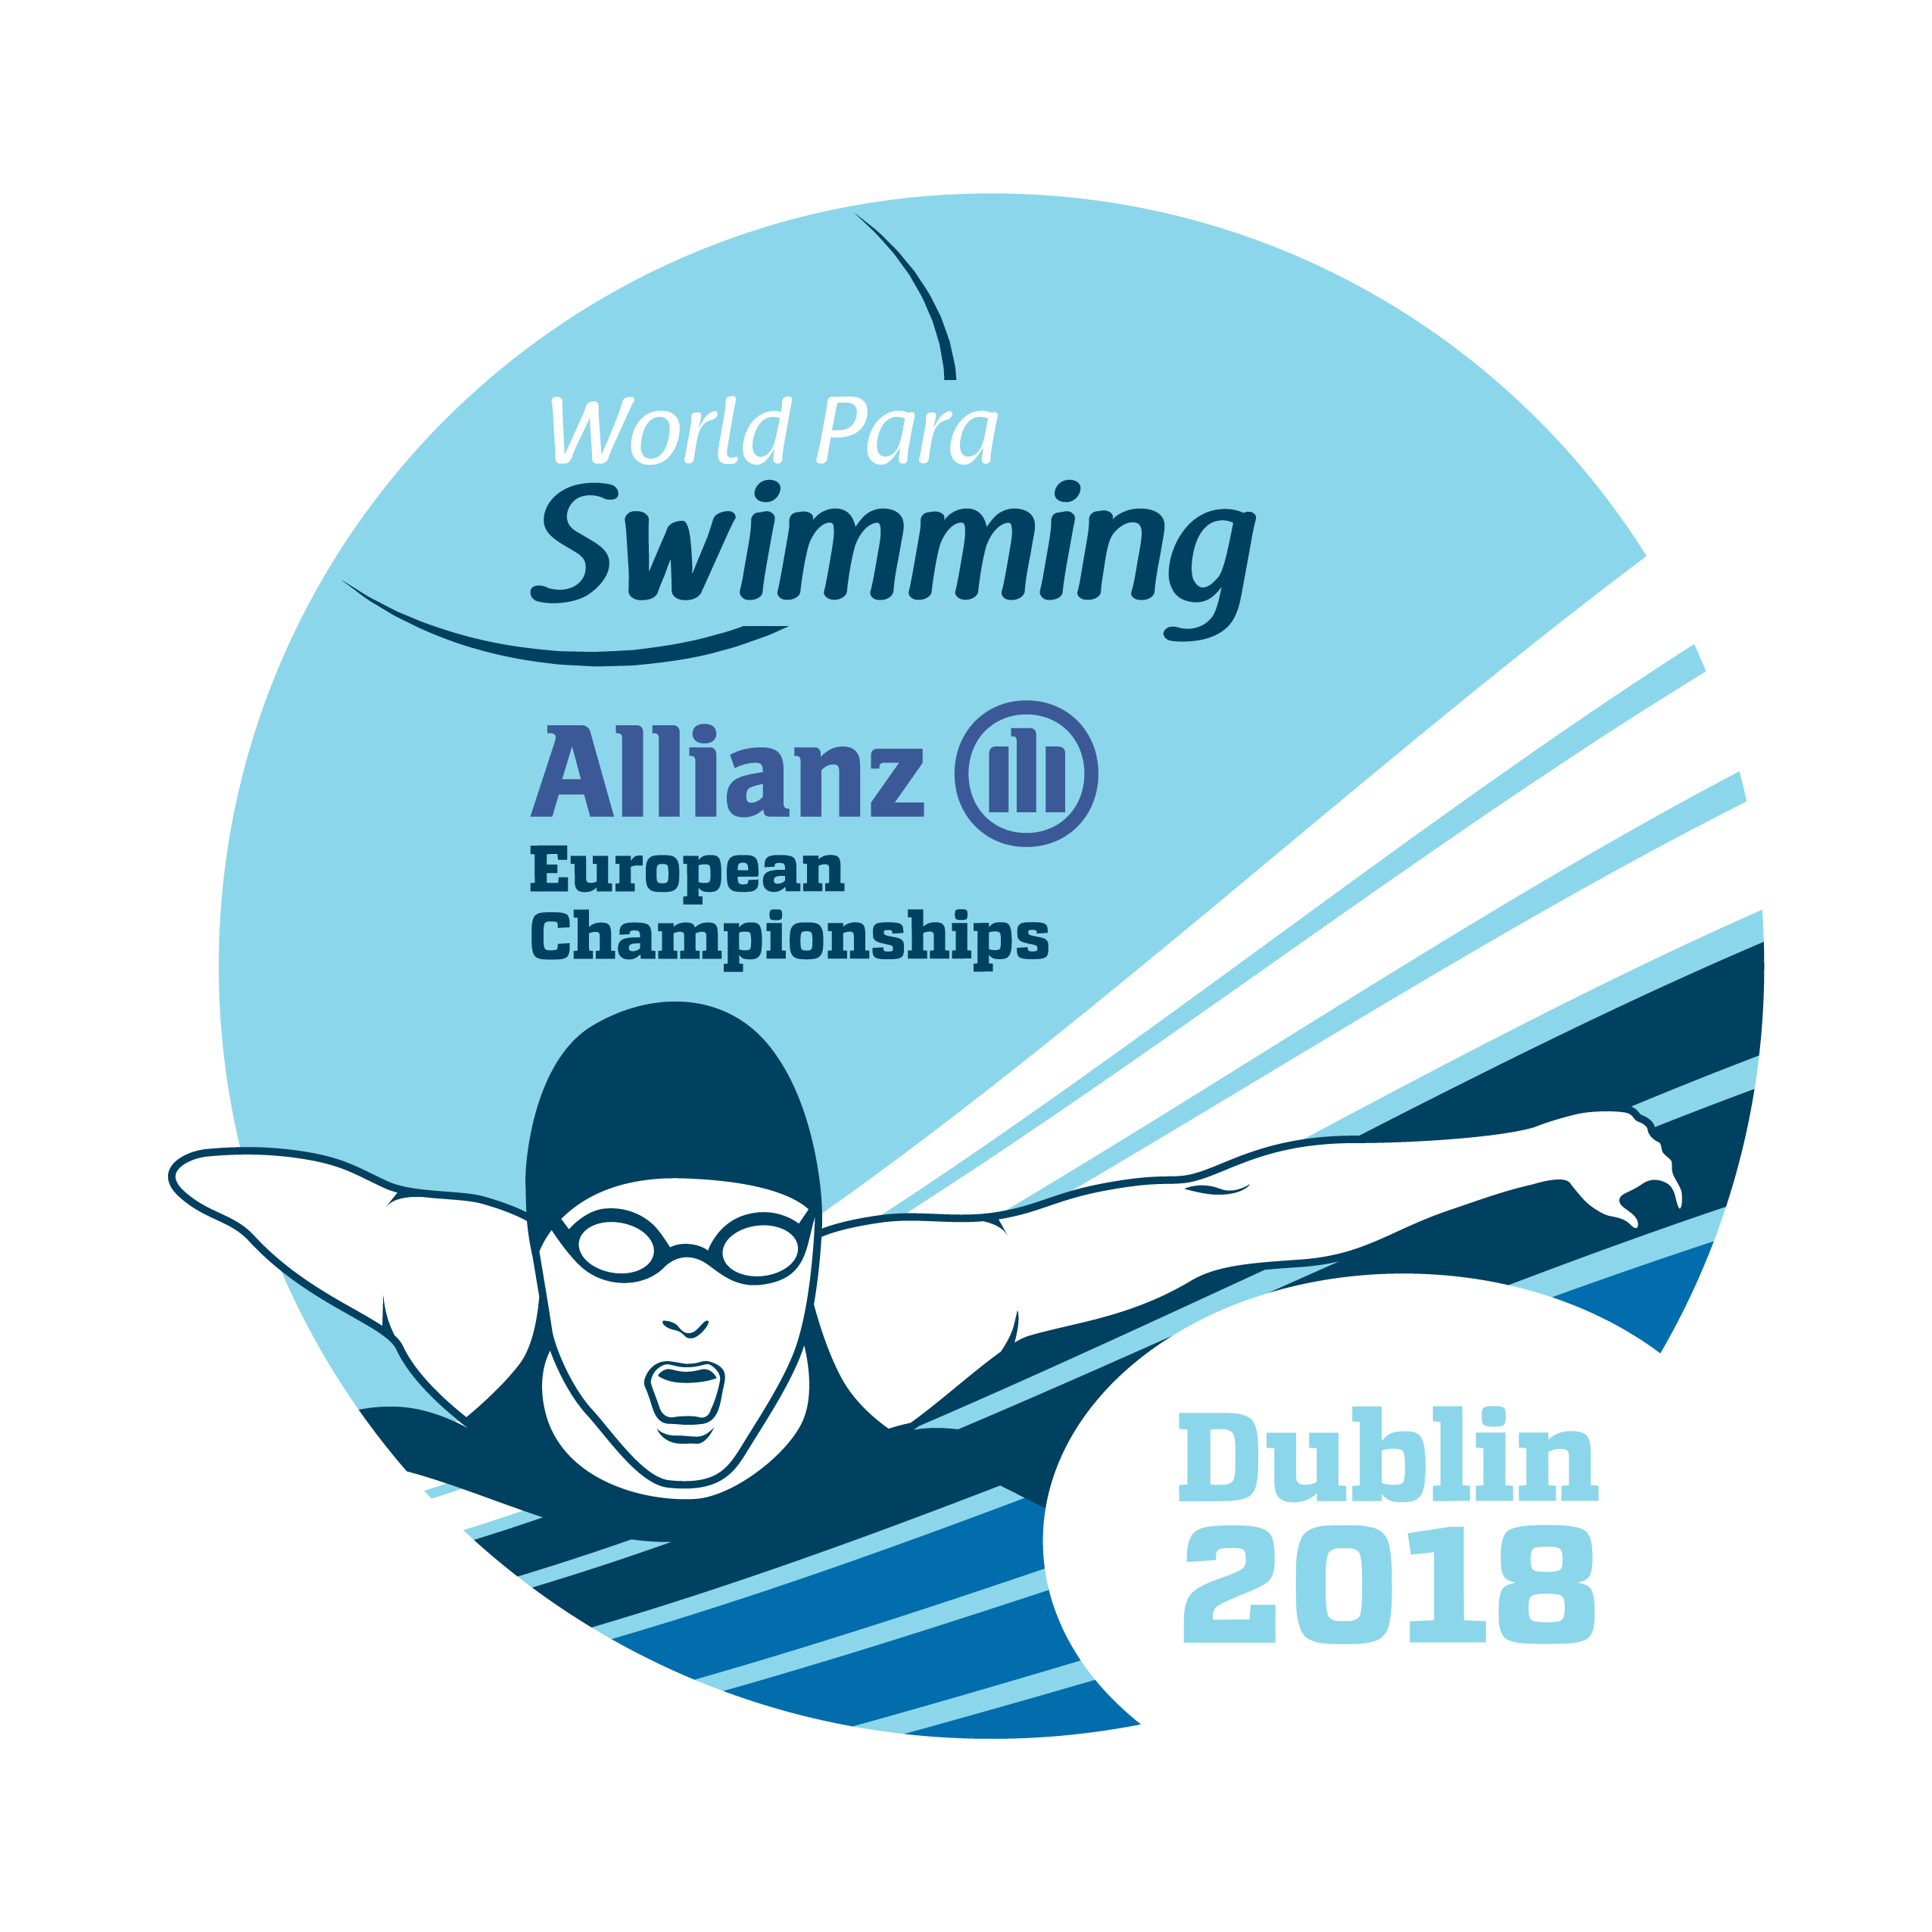 The official logo for the Dublin 2018 World Para Swimming European Championships